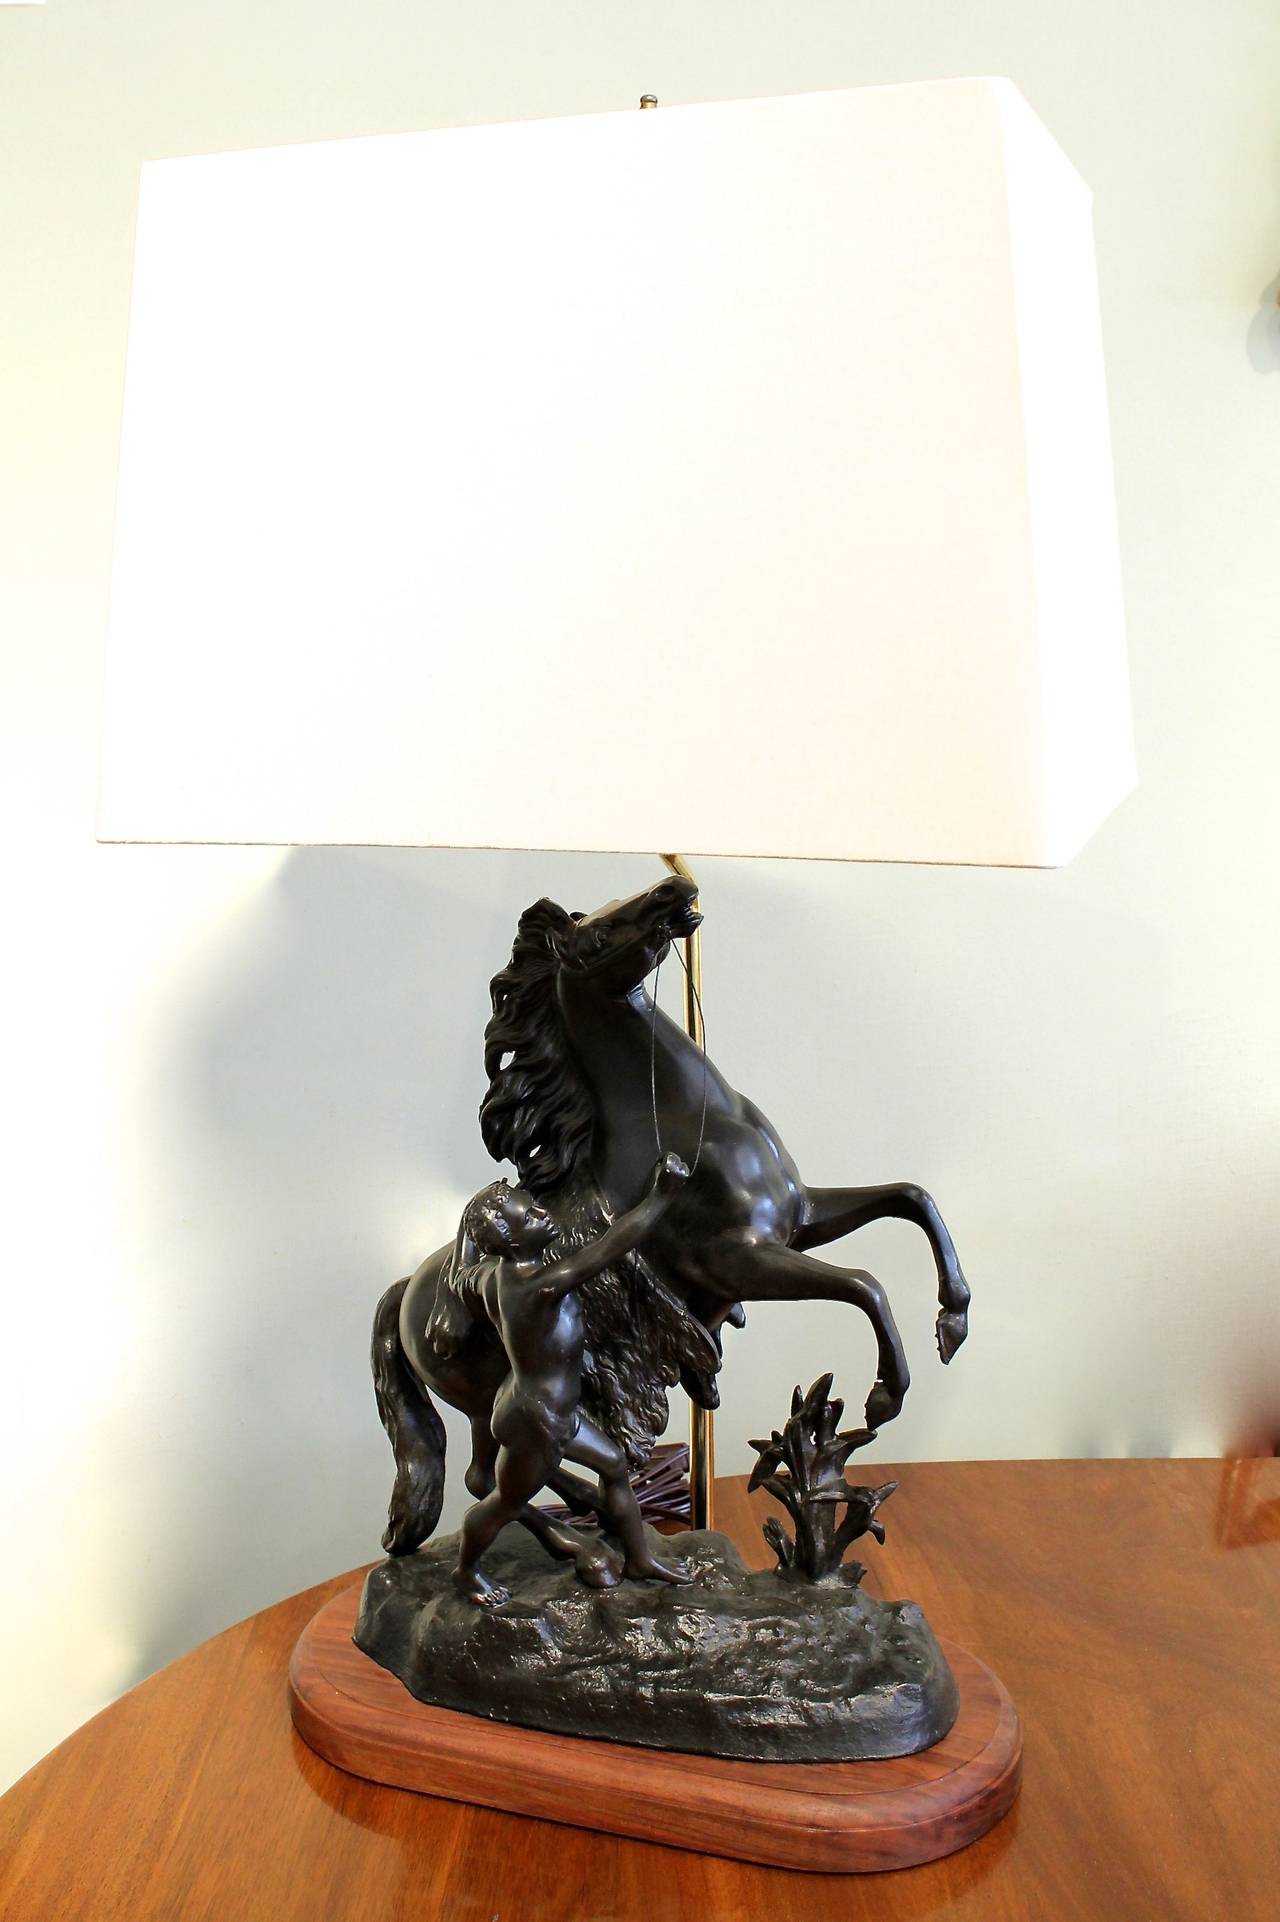 A bronze patinated cast metal (shelter) figural lamp, the horse and young man a copy of one of the “Chevaux de Marly,” marble sculptures by Guillaume Coustou, the originals executed in marble for Louis XIV’s Château de Marly in 1745. This is a ca.